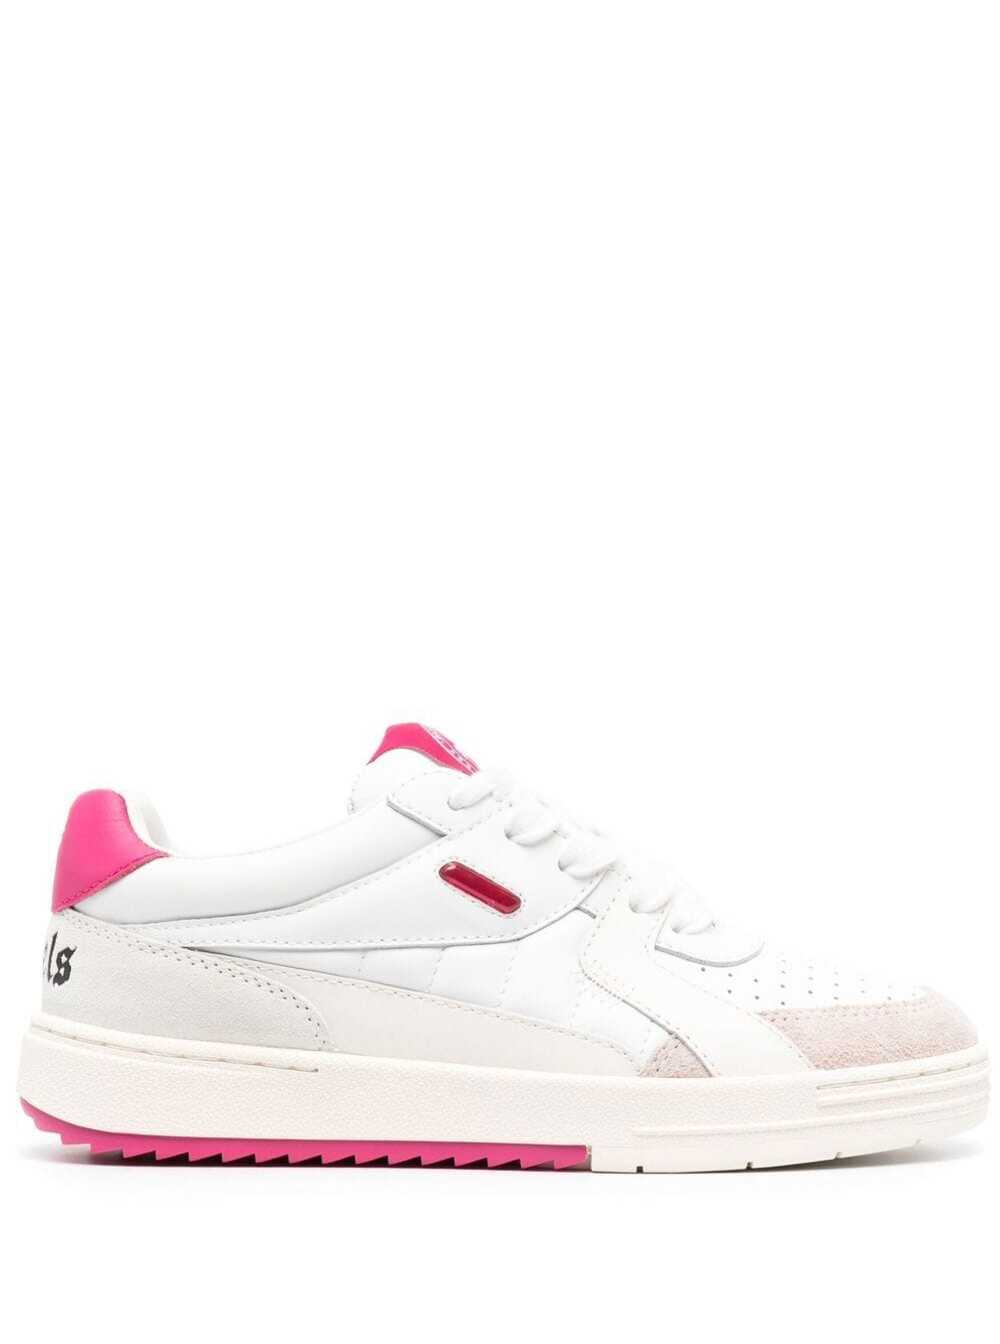 PALM ANGELS PALM UNIVERSITY LOW TOP SNEAKERS IN WHITE AND PINK LEATHER WOMAN